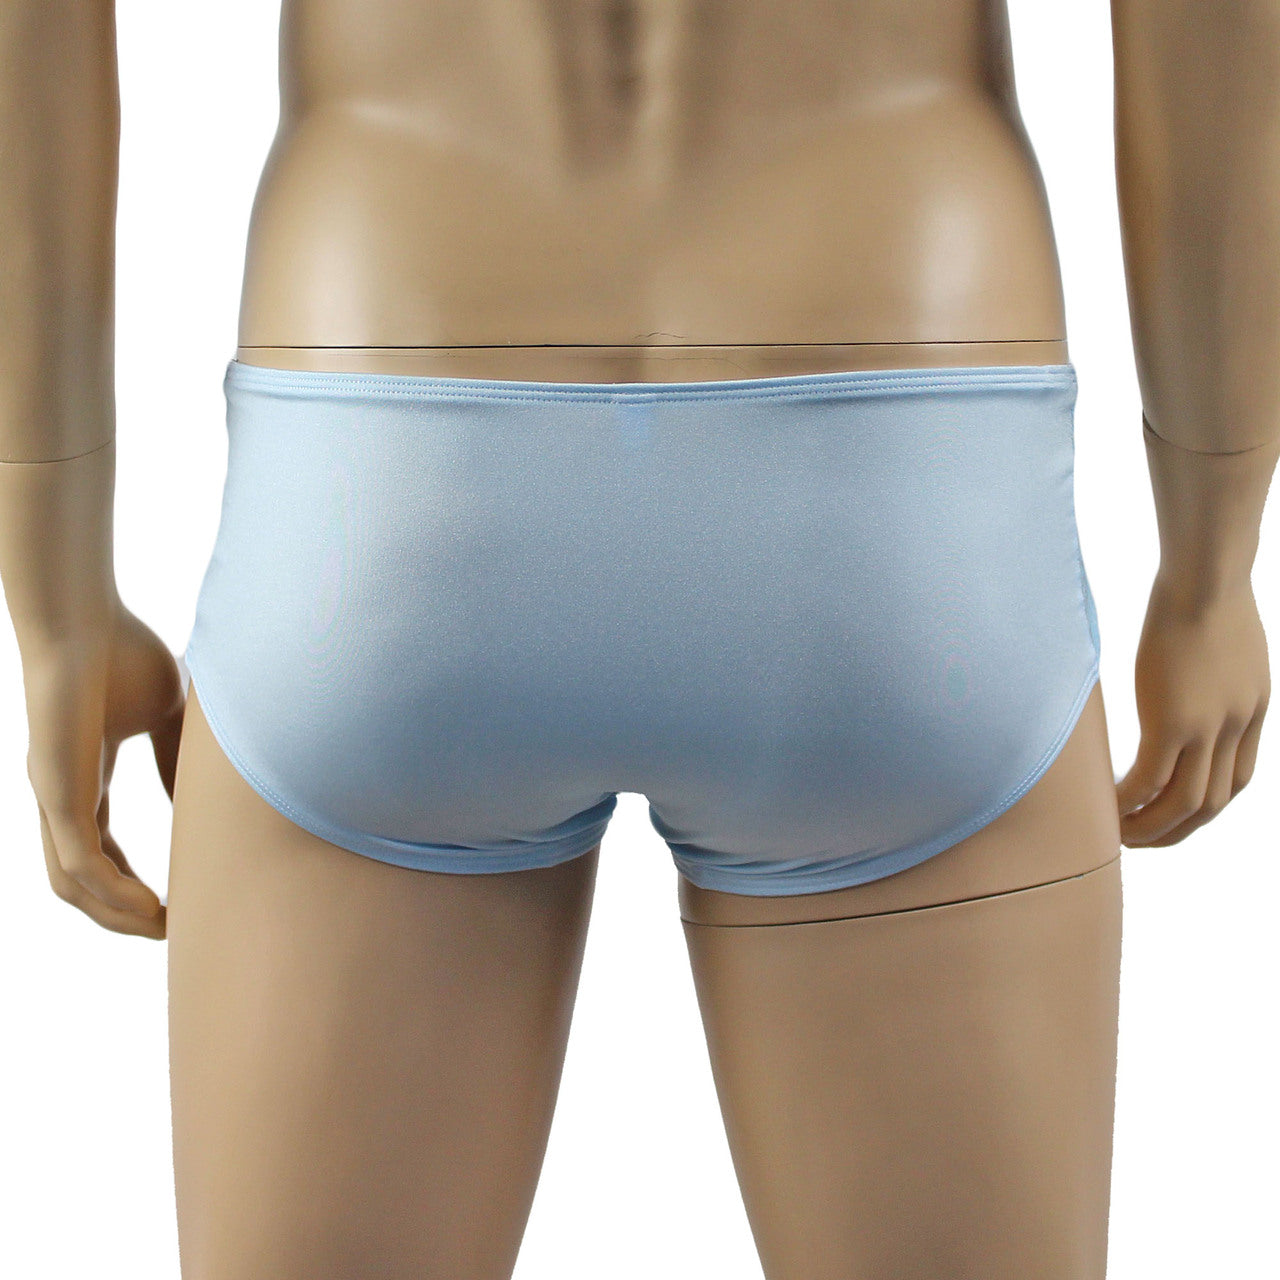 Mens Luxury Spandex & Lace Bra Top and Boxer Brief (light blue plus other colours)